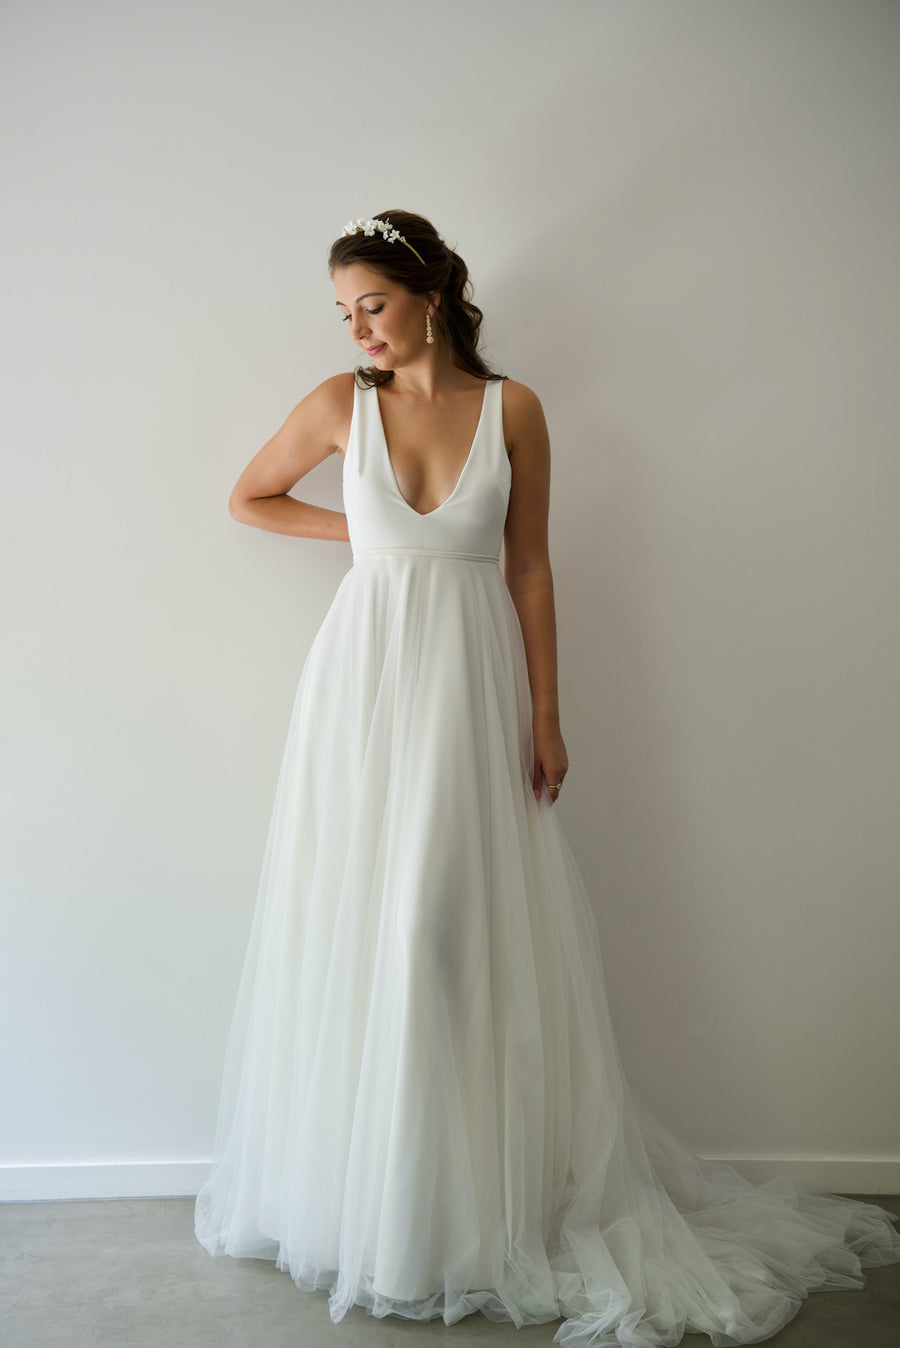 Illy Gown – When Freddie met Lilly